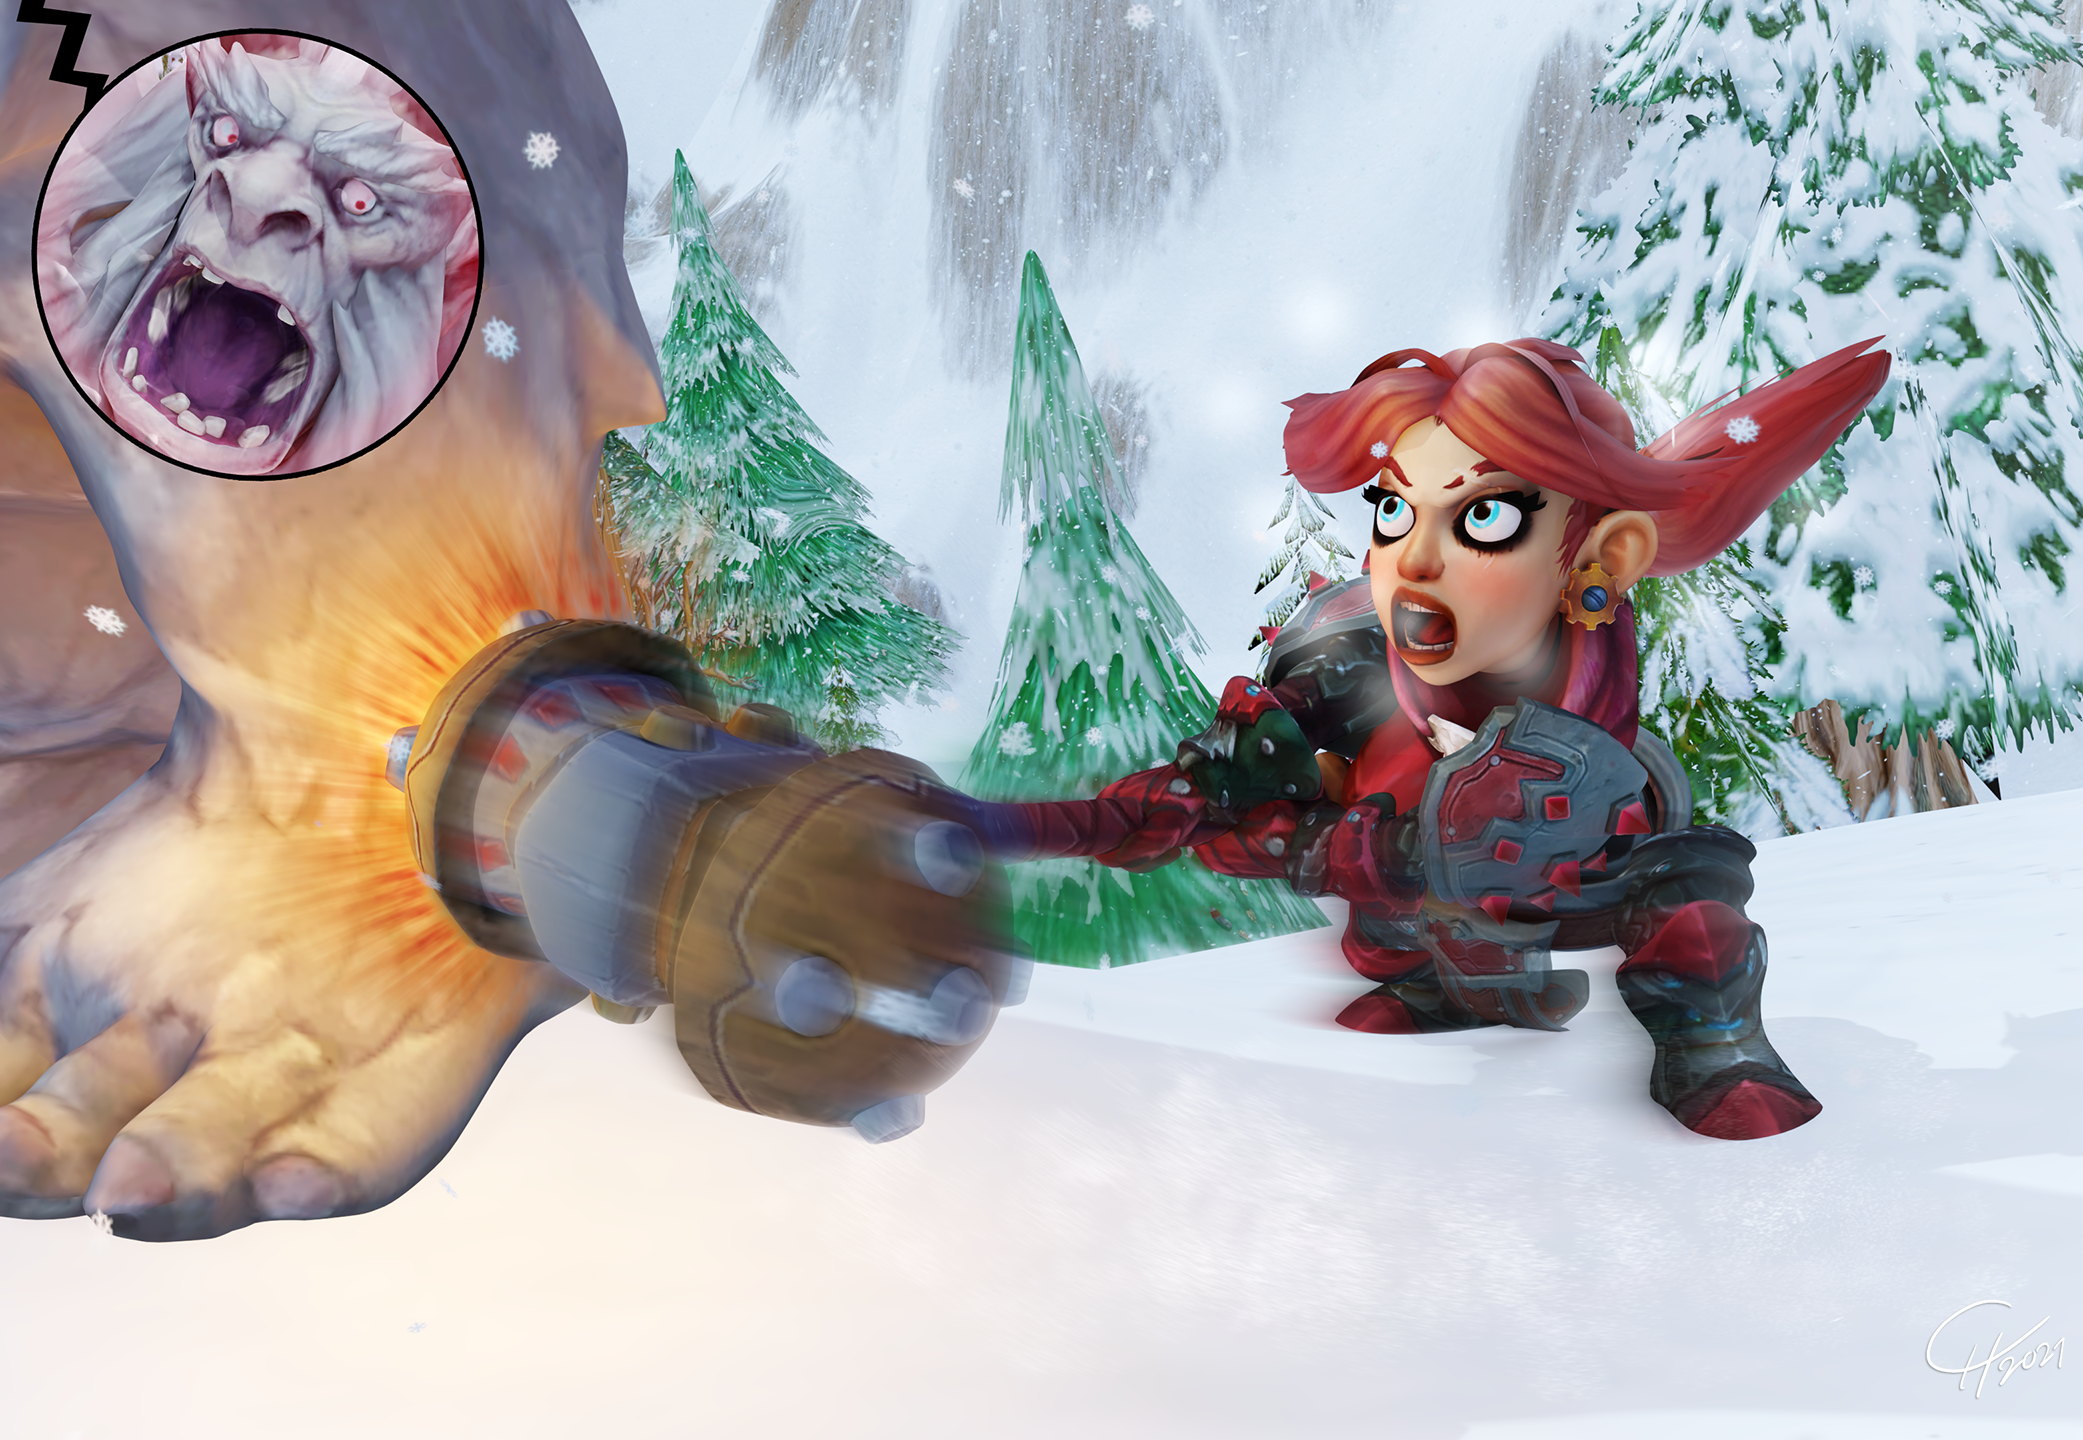 Ankle Breaker in Action [Gnome/SFW]
Those darn Wendigos are once again
causing trouble near Kharanos, Dun Morogh.
The Mountaneers has had enough of it and sent
a lone Gnome to cull the numbers - who notoriously
known for shattering her foes ankles.
[b][url=http://bakaras.com/murlocish/albums/userpics/10001/5/2021BrixiWarriorScene01XL.png]==XL-Size Edit==[/url][/b]
Keywords: OC;Gnome;SFW